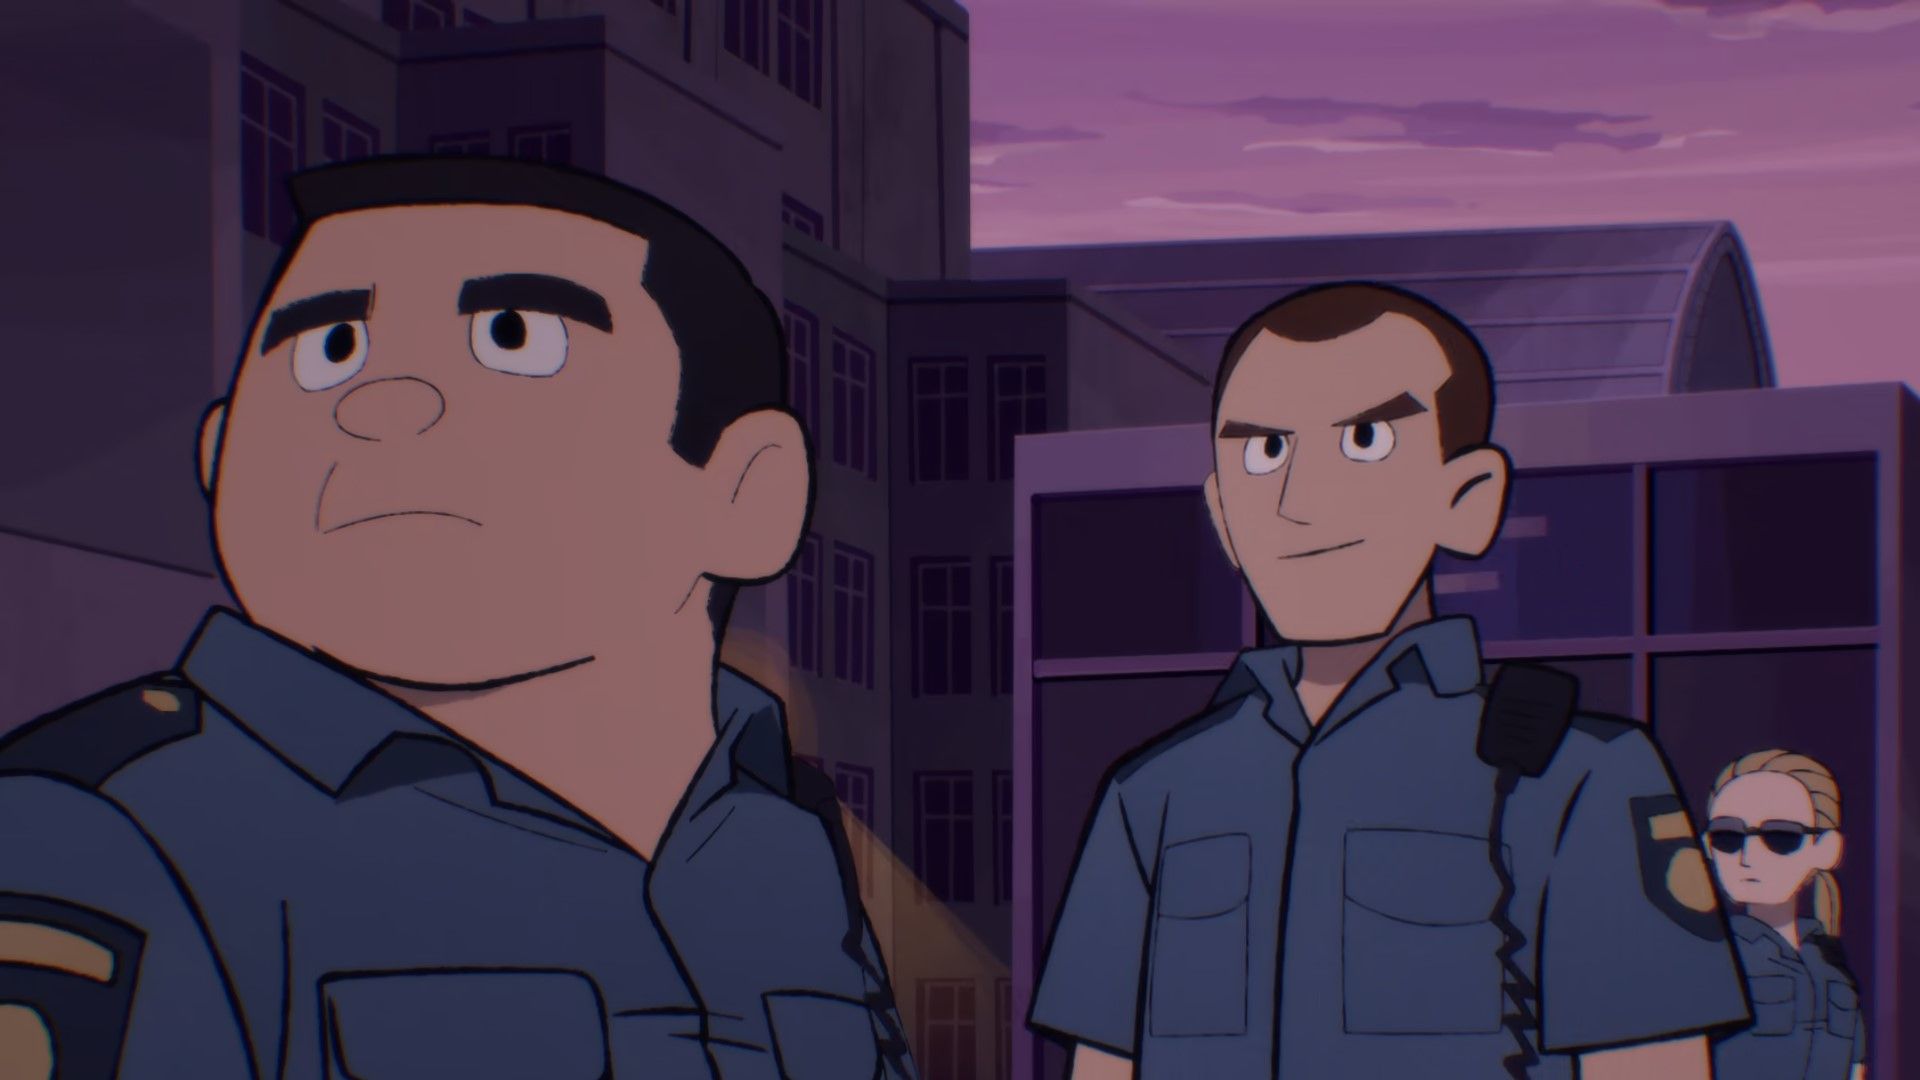 Screenshot from Scott Pilgrim Takes Off anime shows Security Guards #1 and #2 who are voiced by Simon Pegg and Nick Frost.